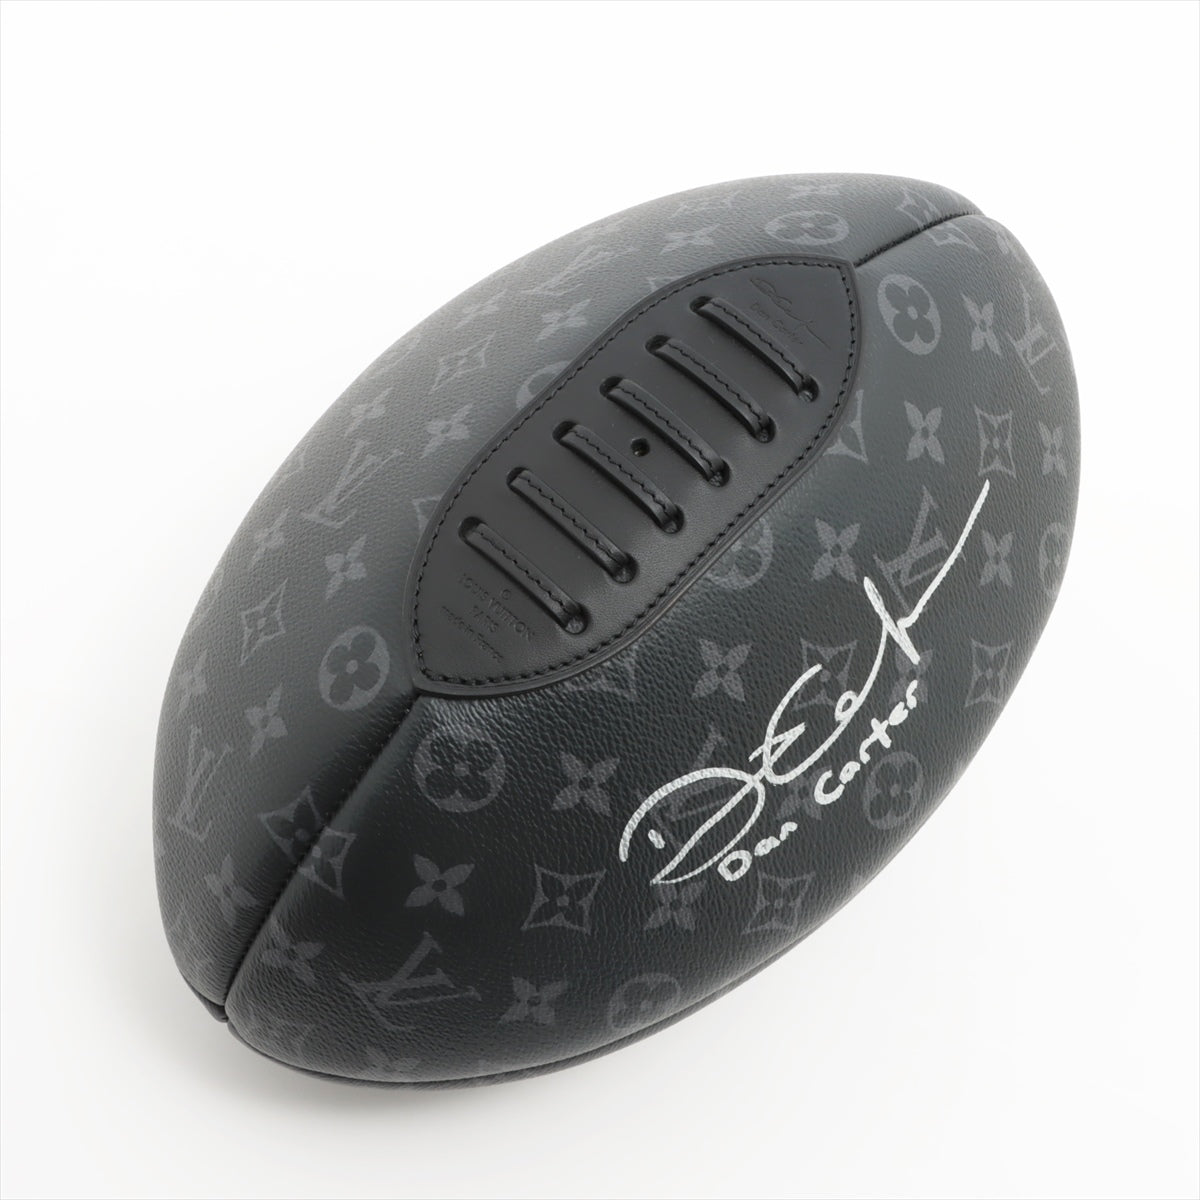 Louis Vuitton Baron RUGBY SA3159 rugby ball PVC & leather Monogram Eclipse Dan Carter Collaboration There is a pedestal